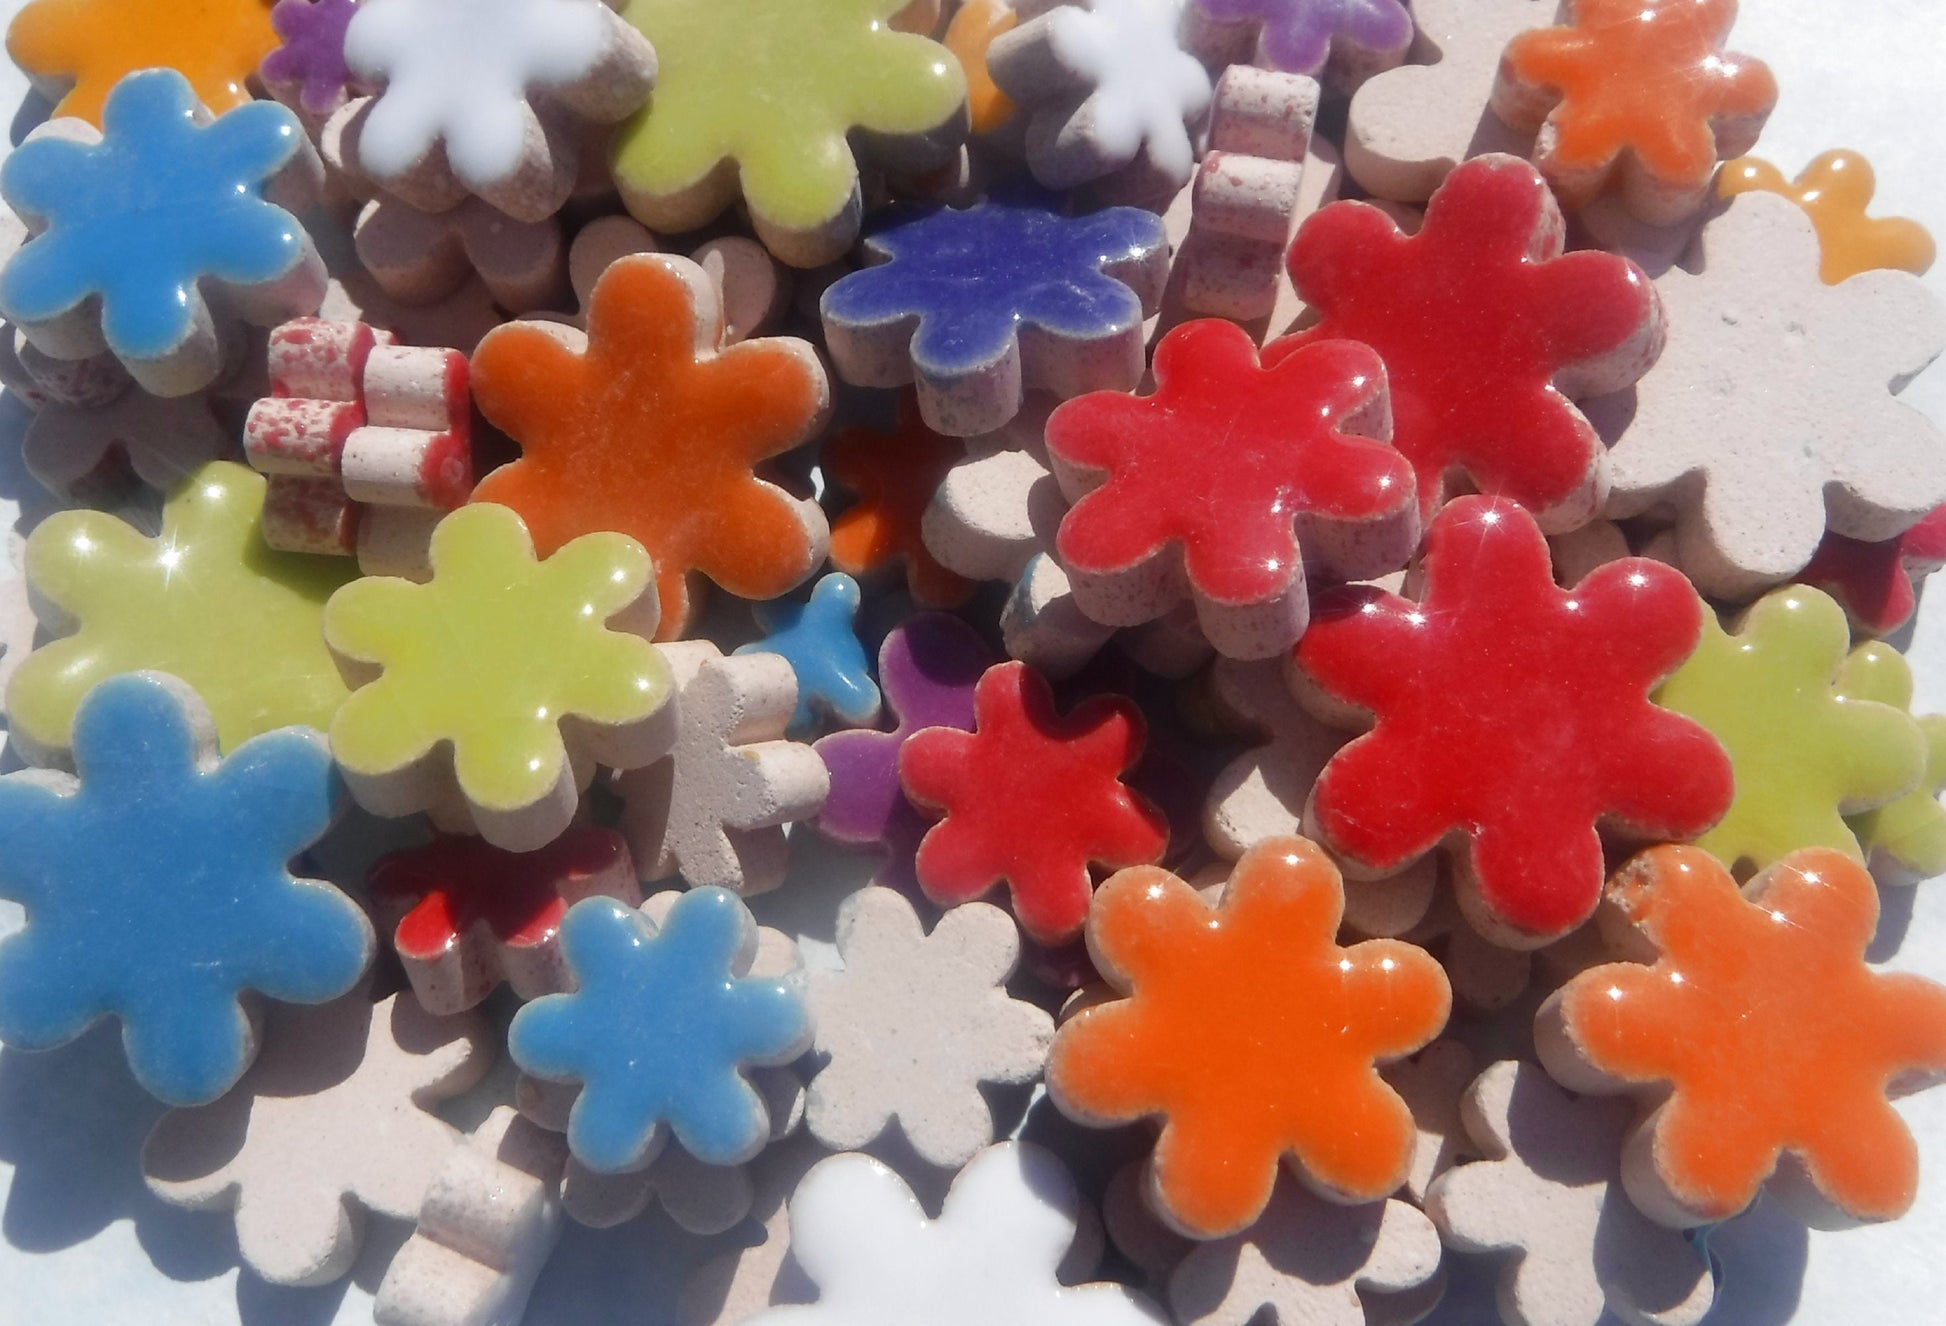 Pretty Posy Mix - Assorted Colors and Sizes of Ceramic Flowers Mosaic Tiles - 50g